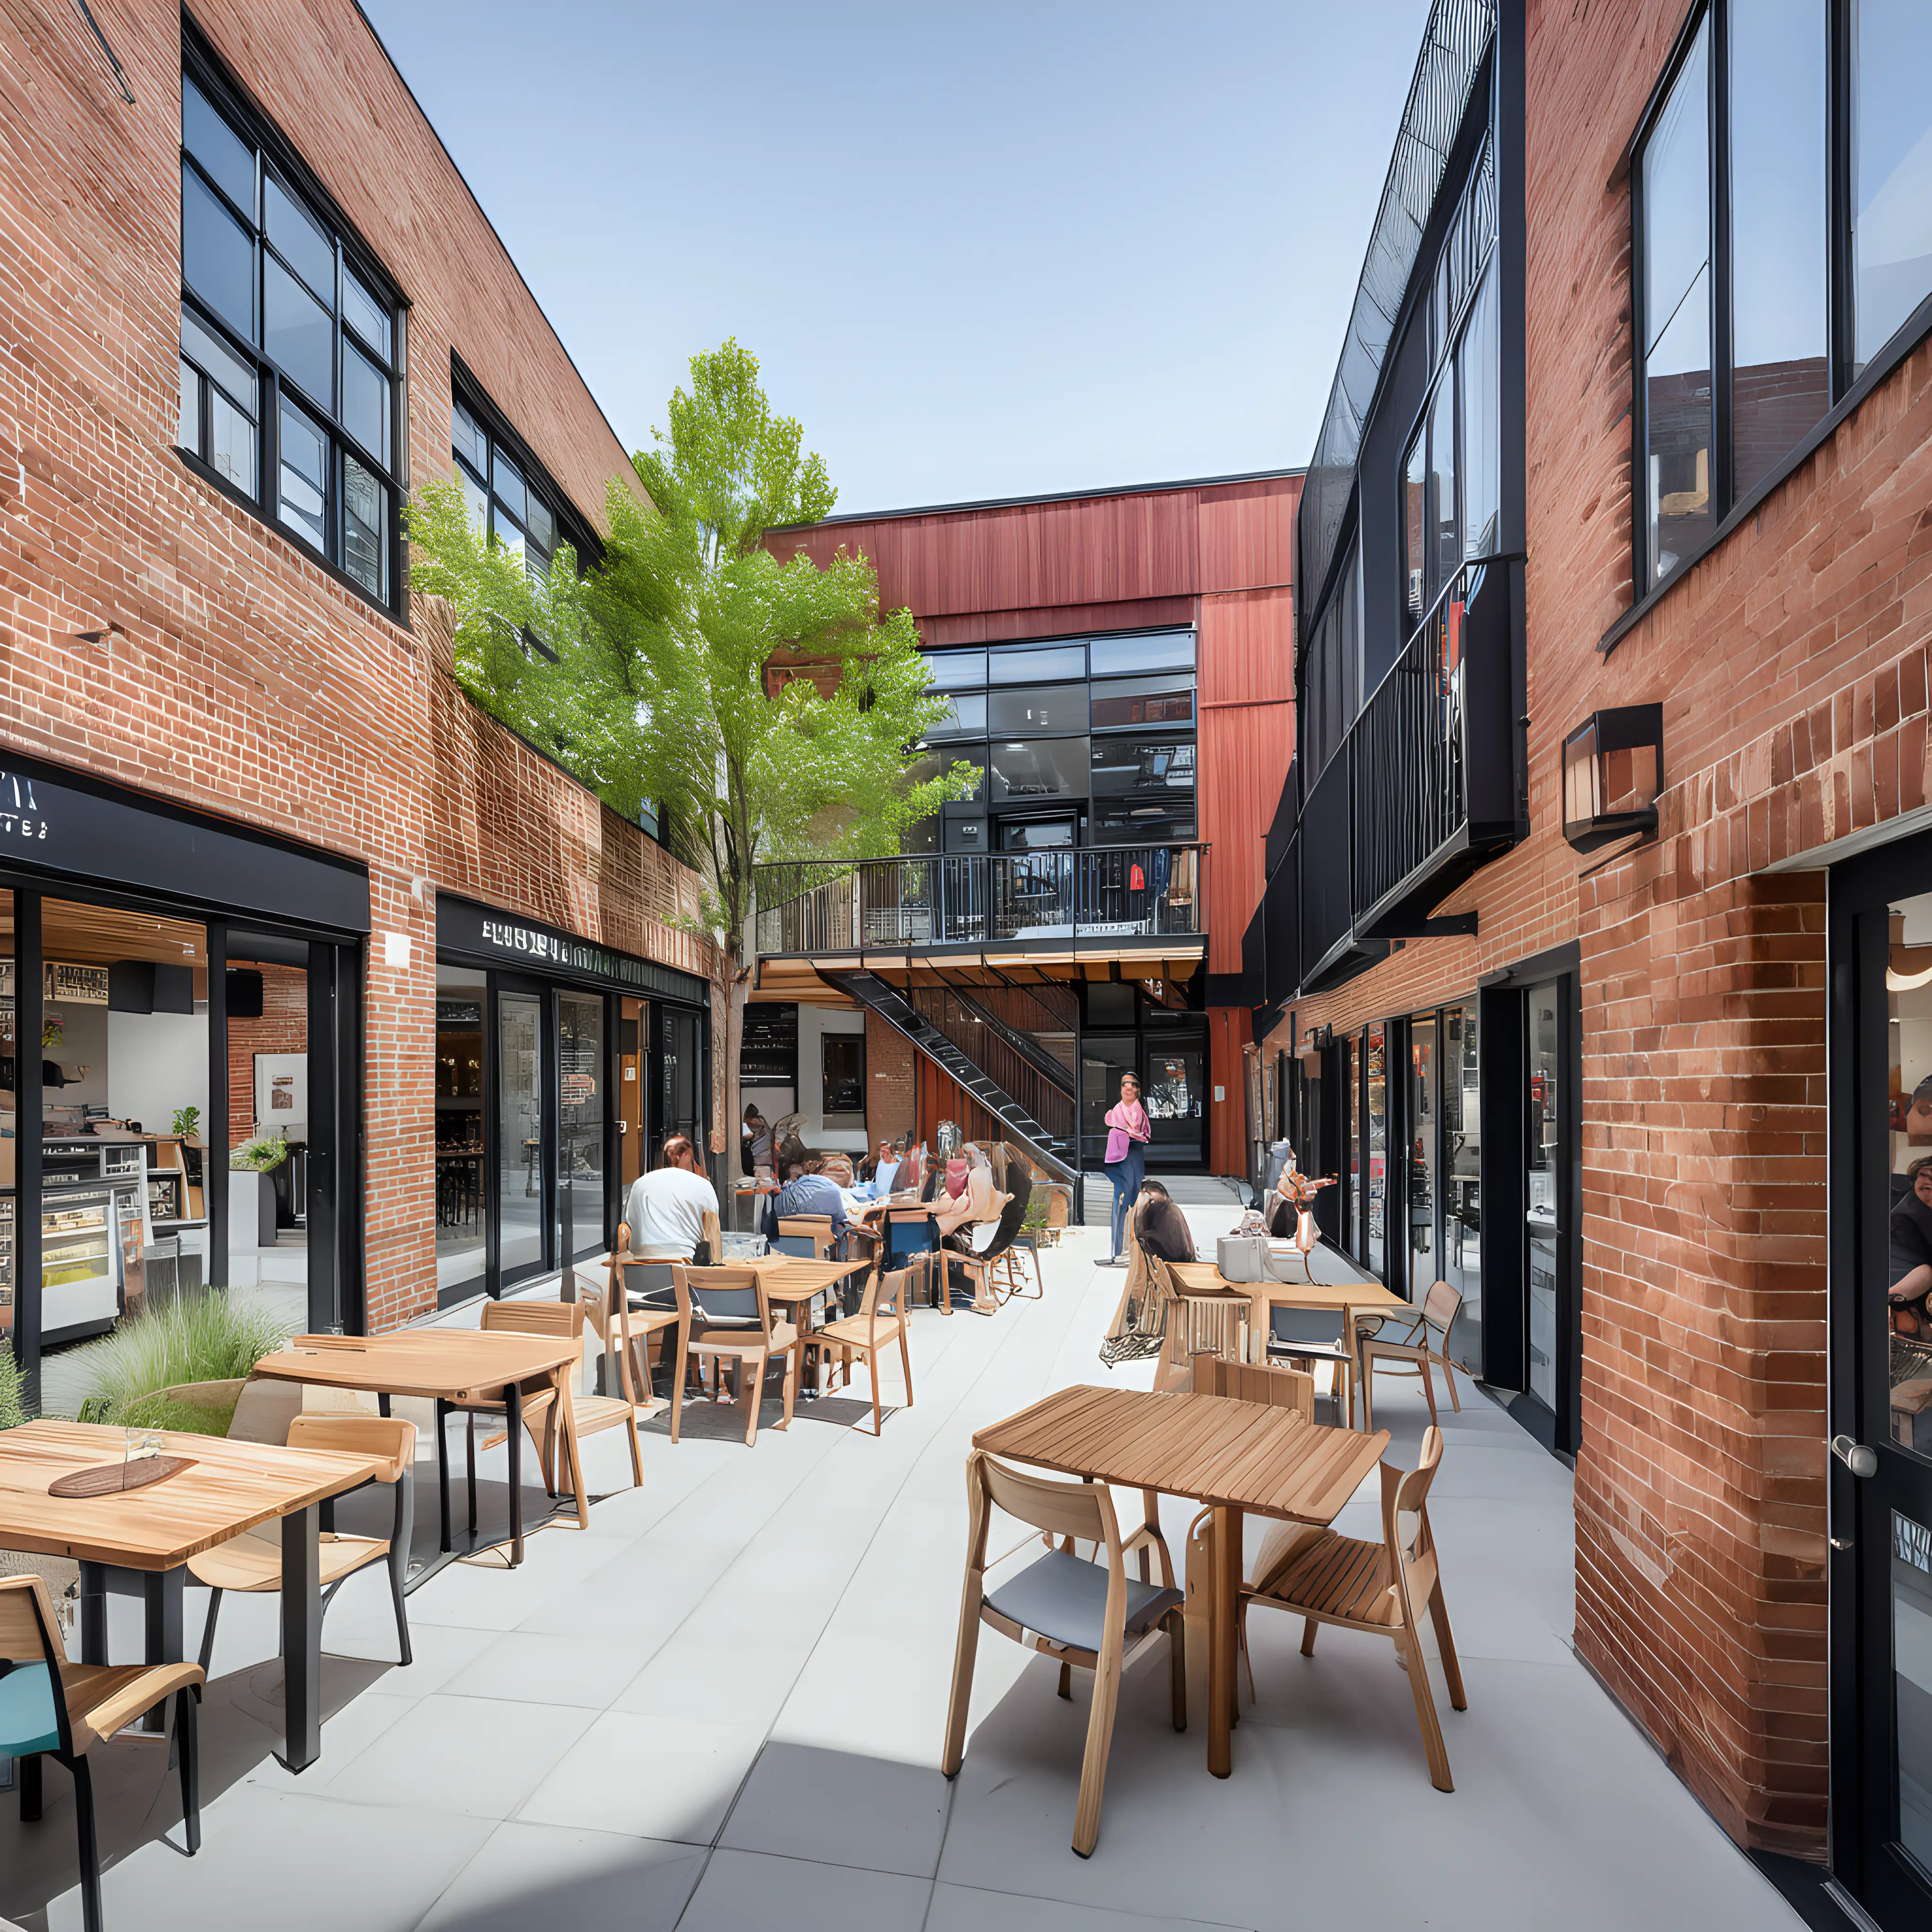 A net-zero, mixed-use community art center. On the ground floor of the community center, there are retail spaces with cafes at the front of a commercial street. A courtyard connects the laneway to cafes in the back. brick and timber cladding. And the building is post-modern. crowd of people